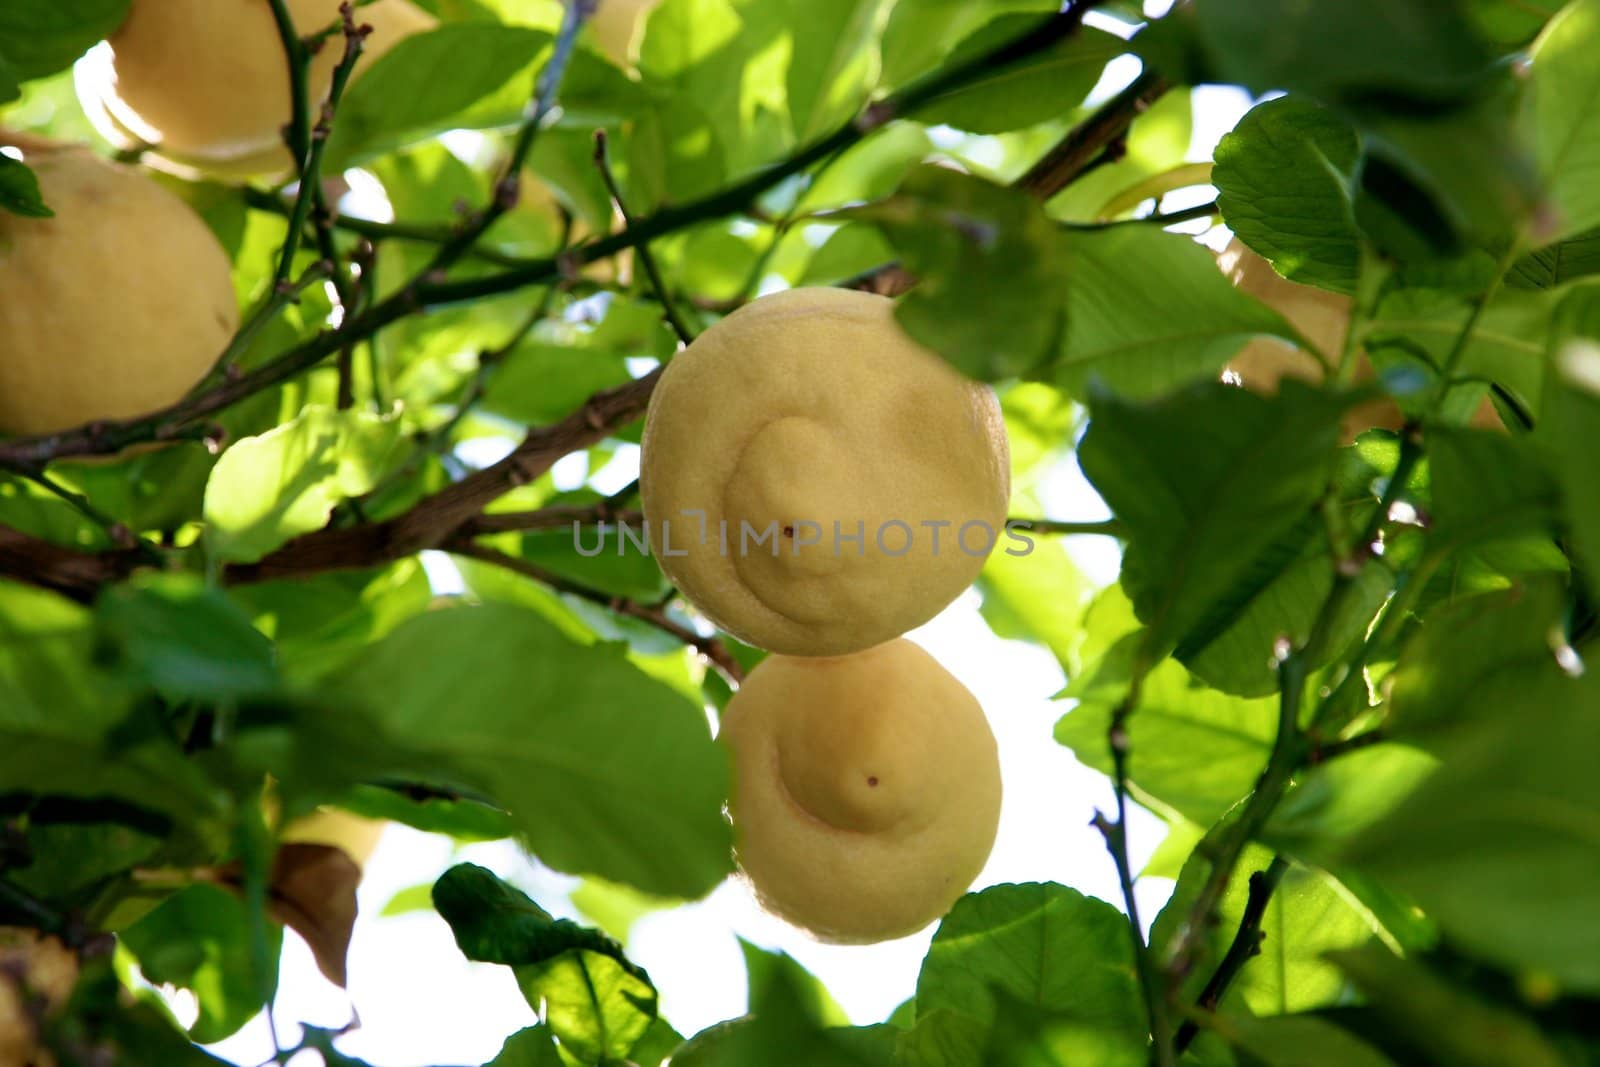 some pears hanging on a branch of a tree